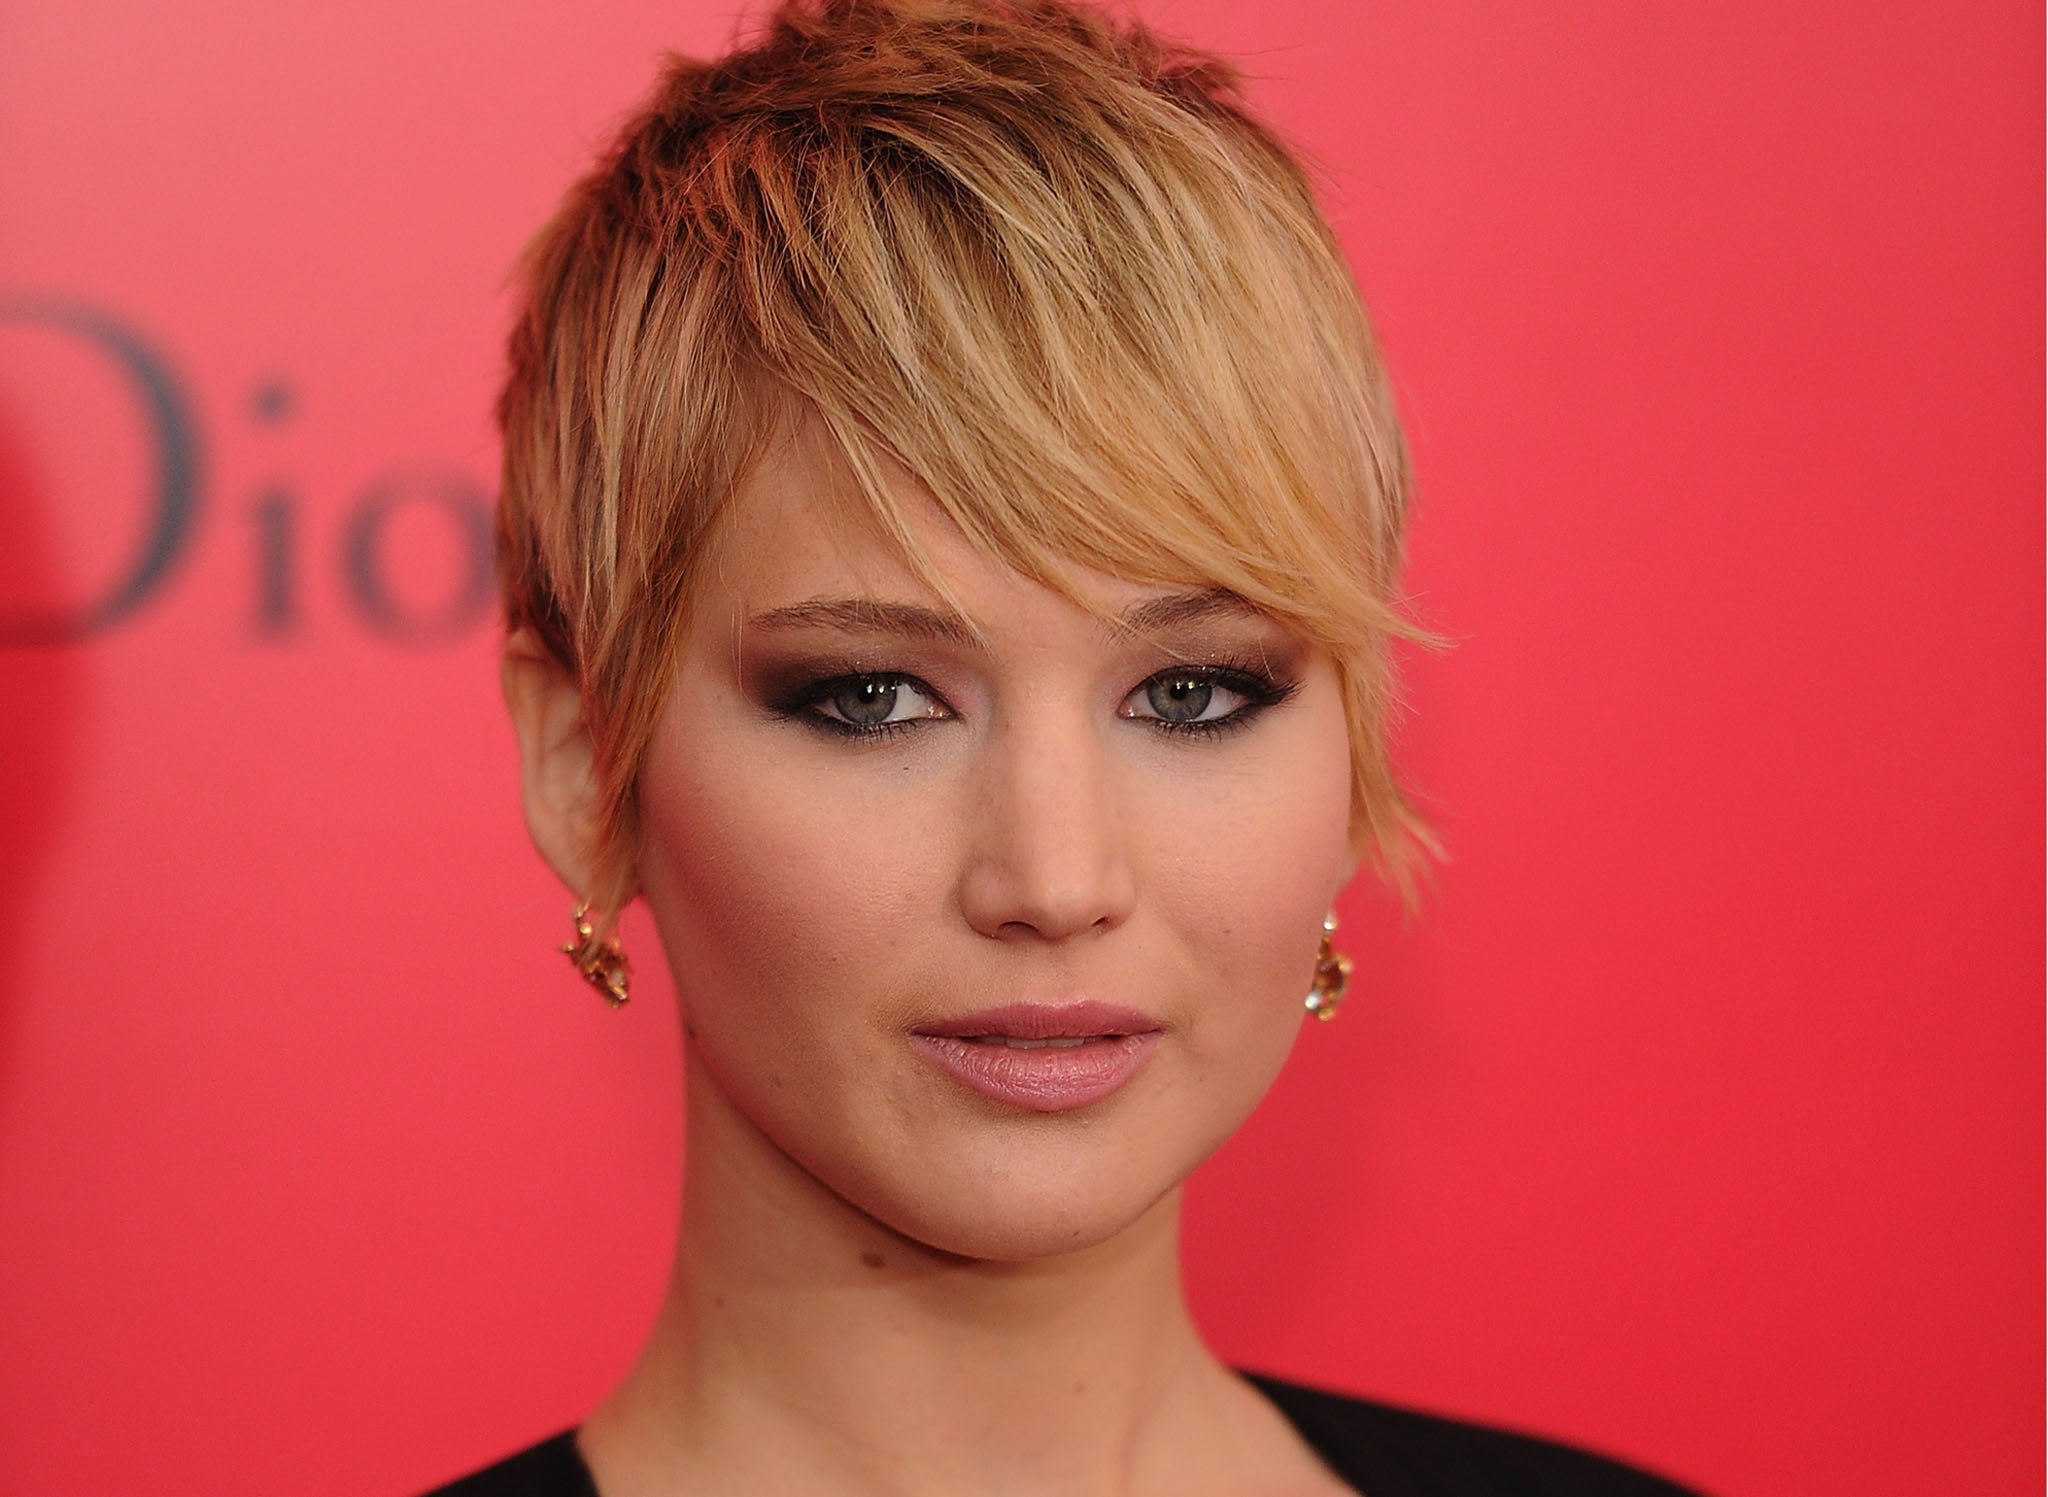 Jennifer Lawrence Fucking - Jennifer Lawrence nude photos leak: FBI and Apple to investigate hacking of  iCloud | The Independent | The Independent